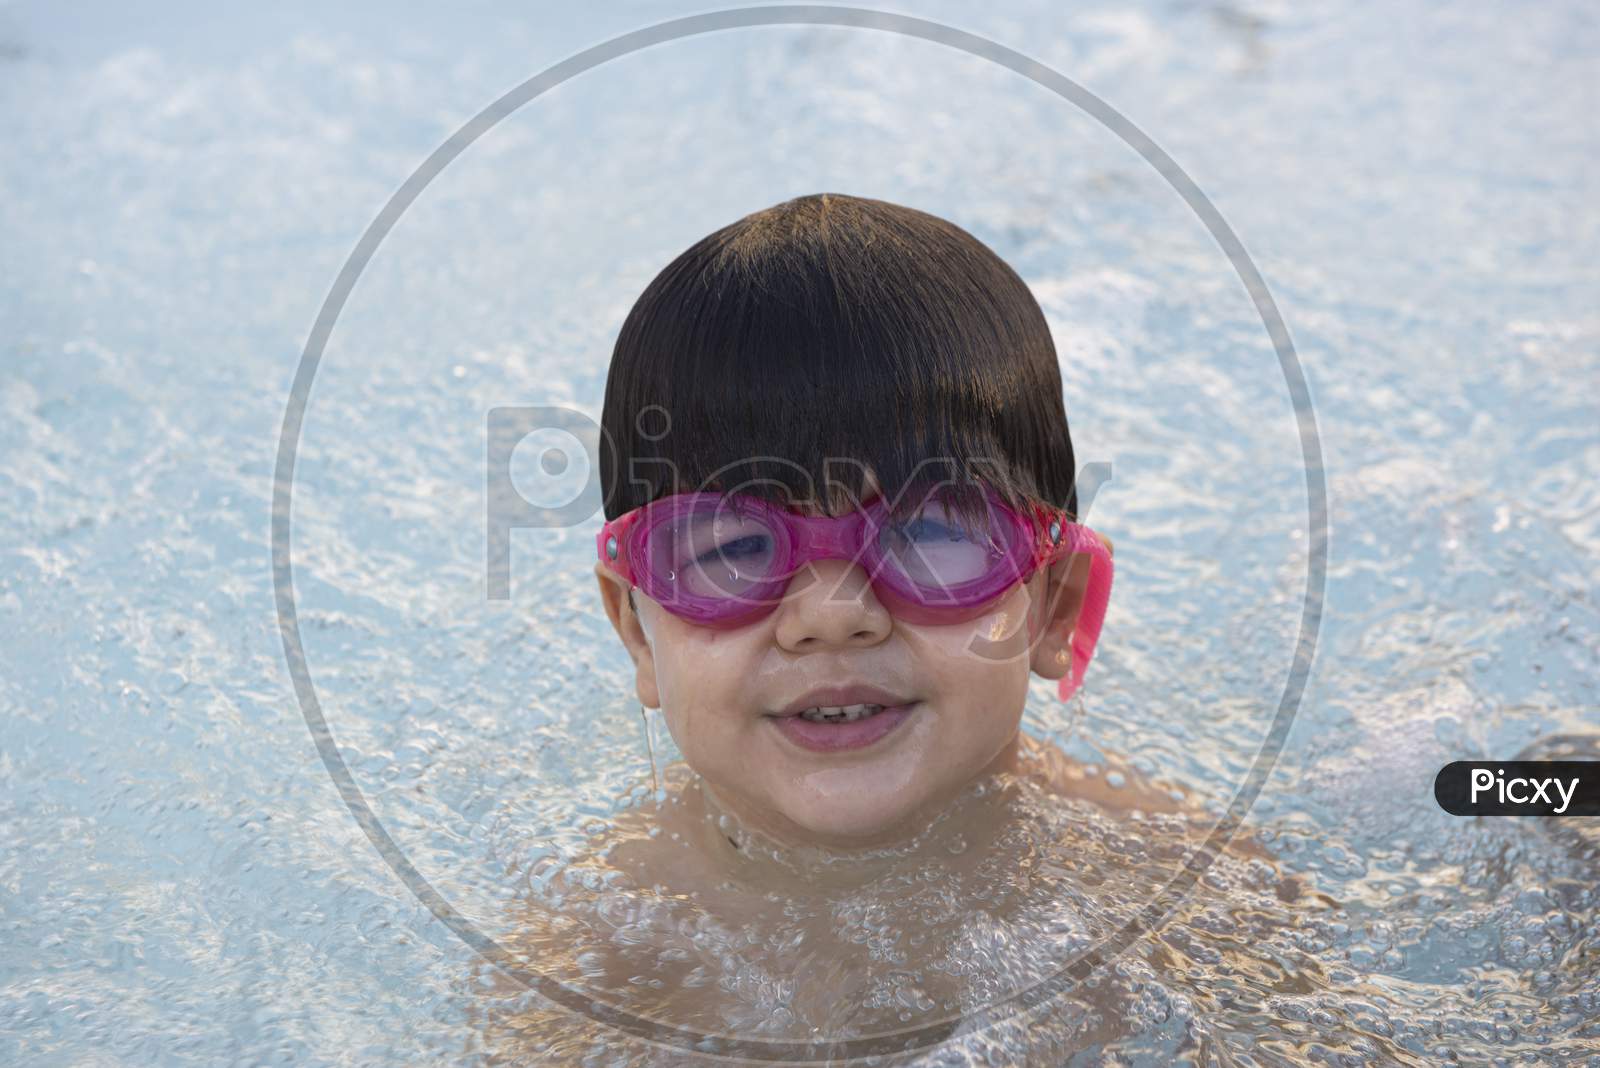 Boy With Pink Swimming Goggles Having Fun In A Hydromassage Bath.